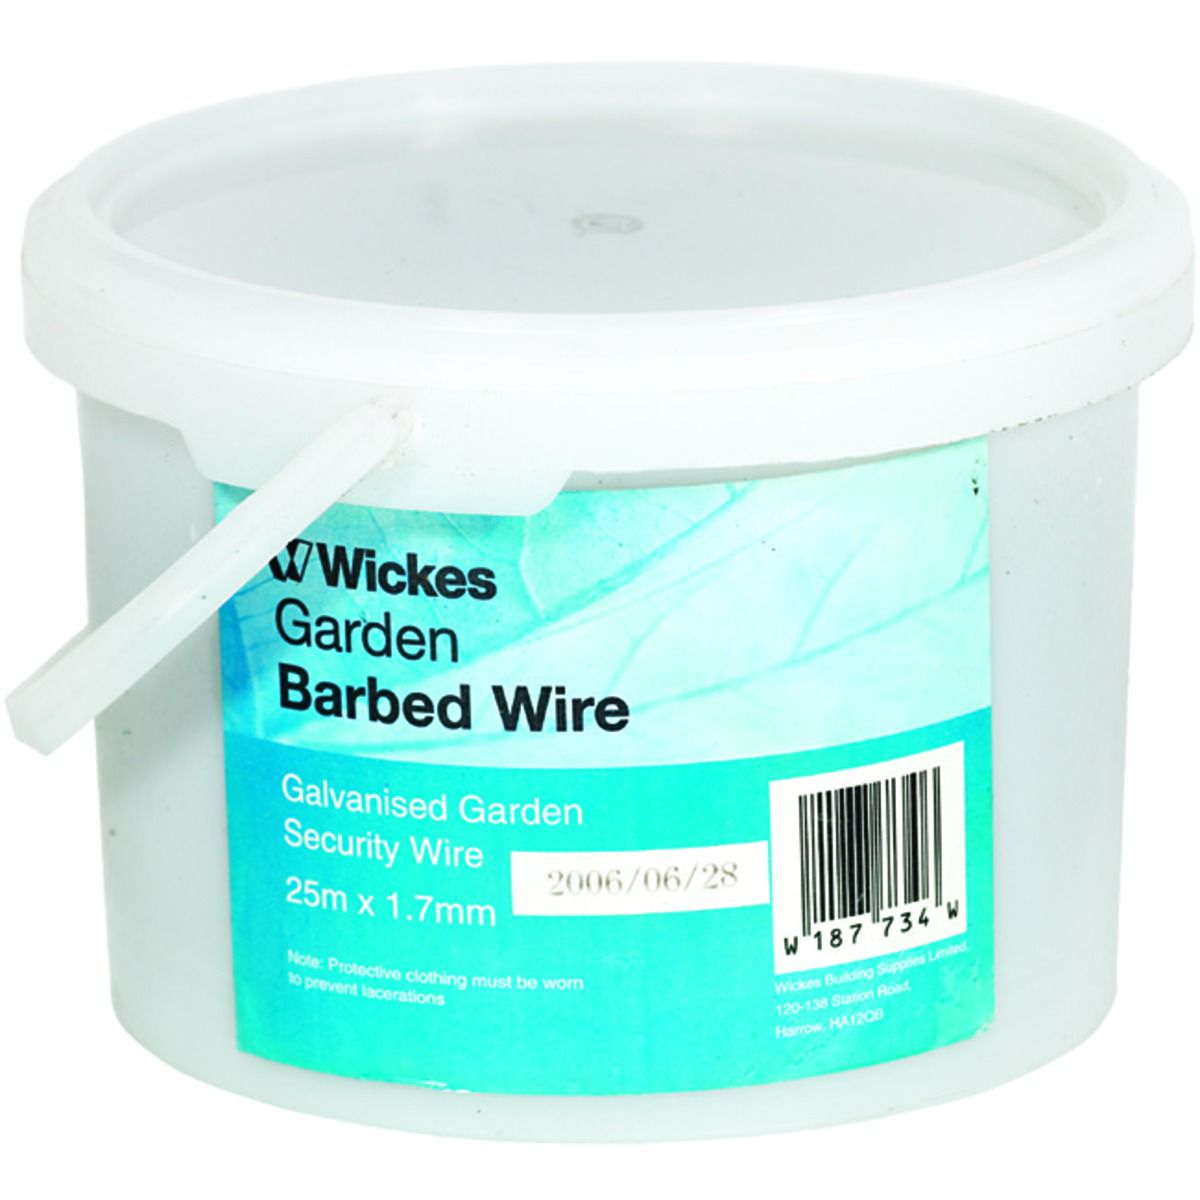 Image of Wickes Galvanised Garden Barbed Wire - 1.7mm x 25m